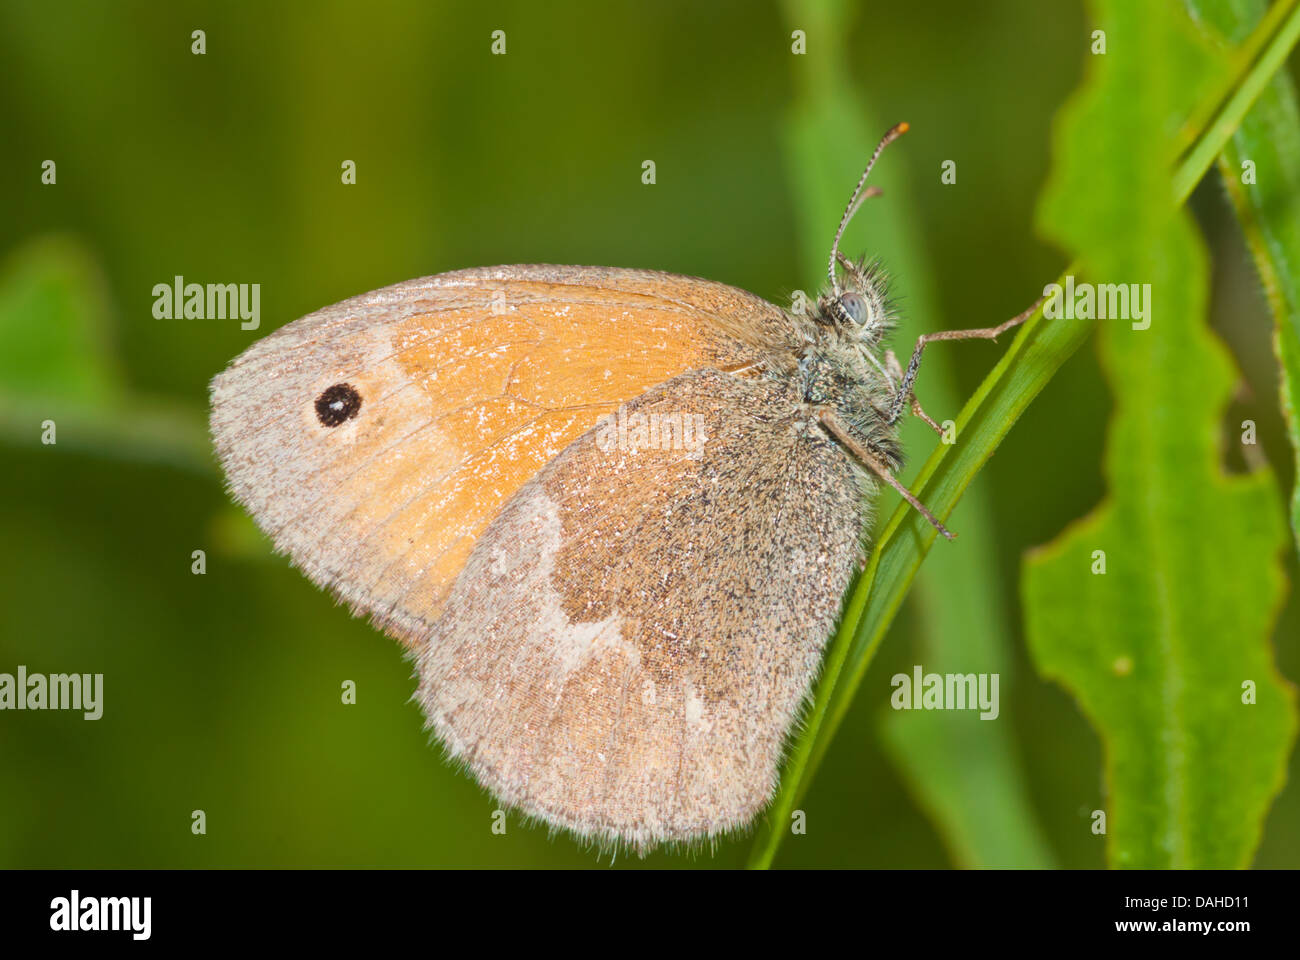 Common ringlet butterfly (Coenonympha tullia) perched on a grass blade, Little Cataraqui Conservation Area, Ontario Stock Photo